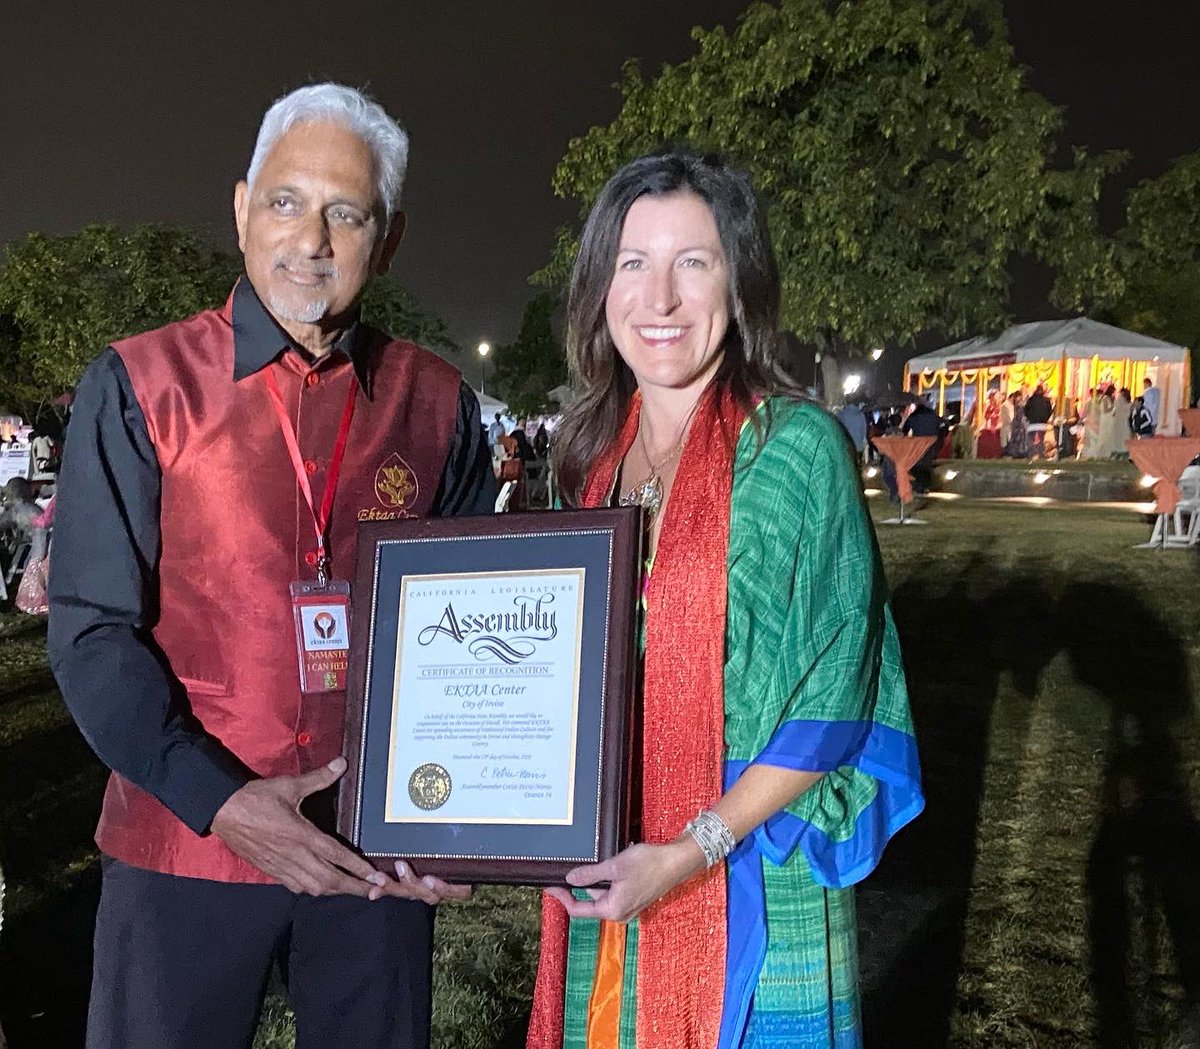 Happy Diwali! It was wonderful celebrating with EKTAA Center last night! Thank you for all you do spreading awareness of traditional Indian culture and bringing the community together.